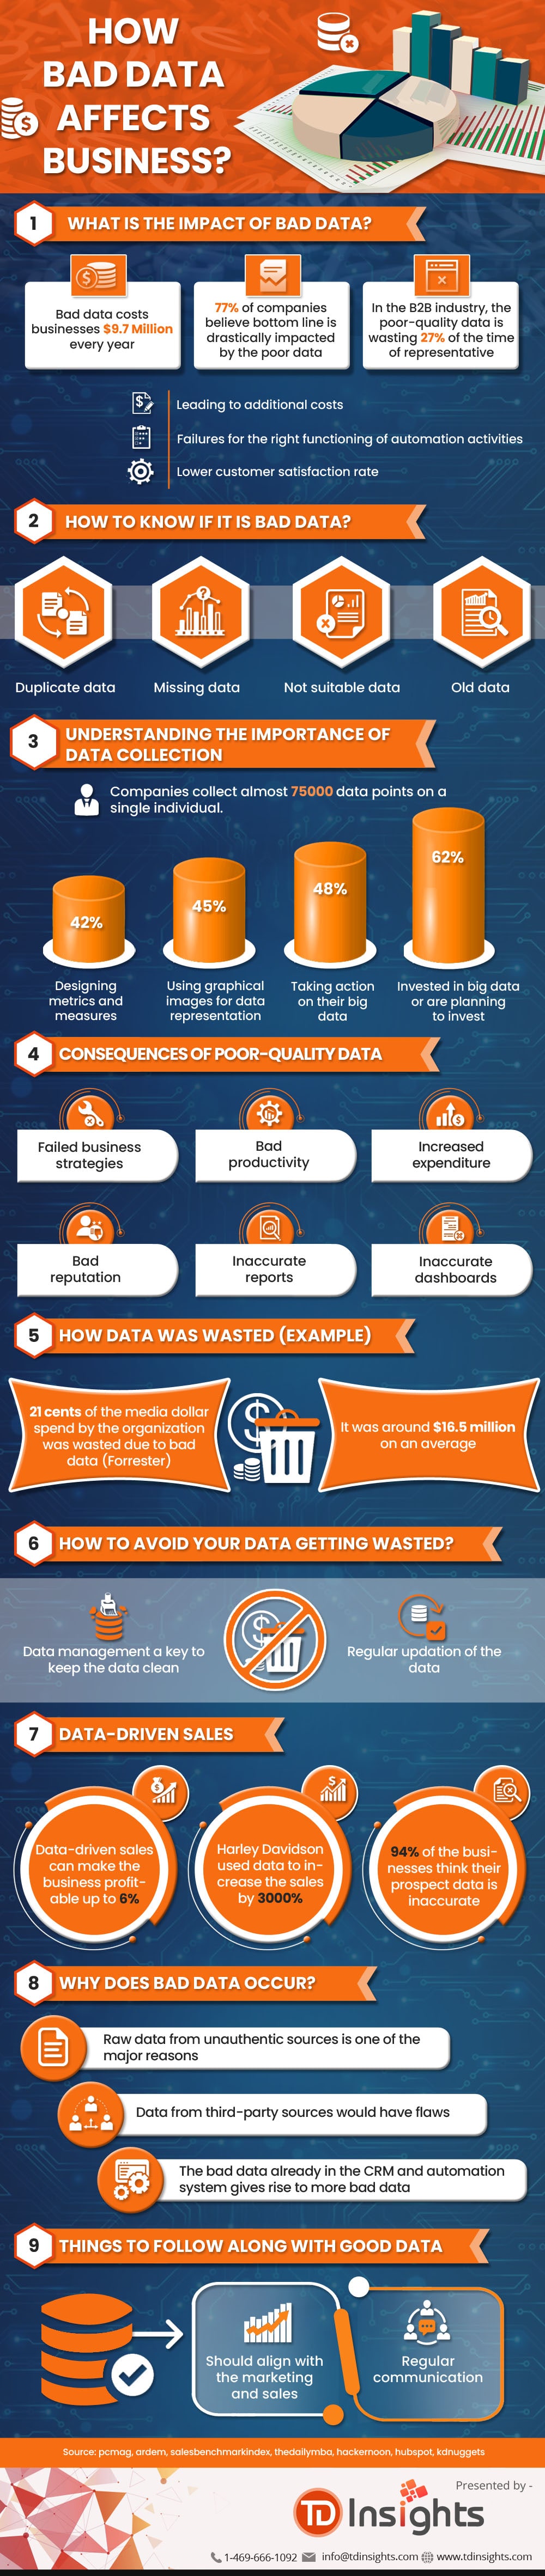 how-bad-data-affects-business